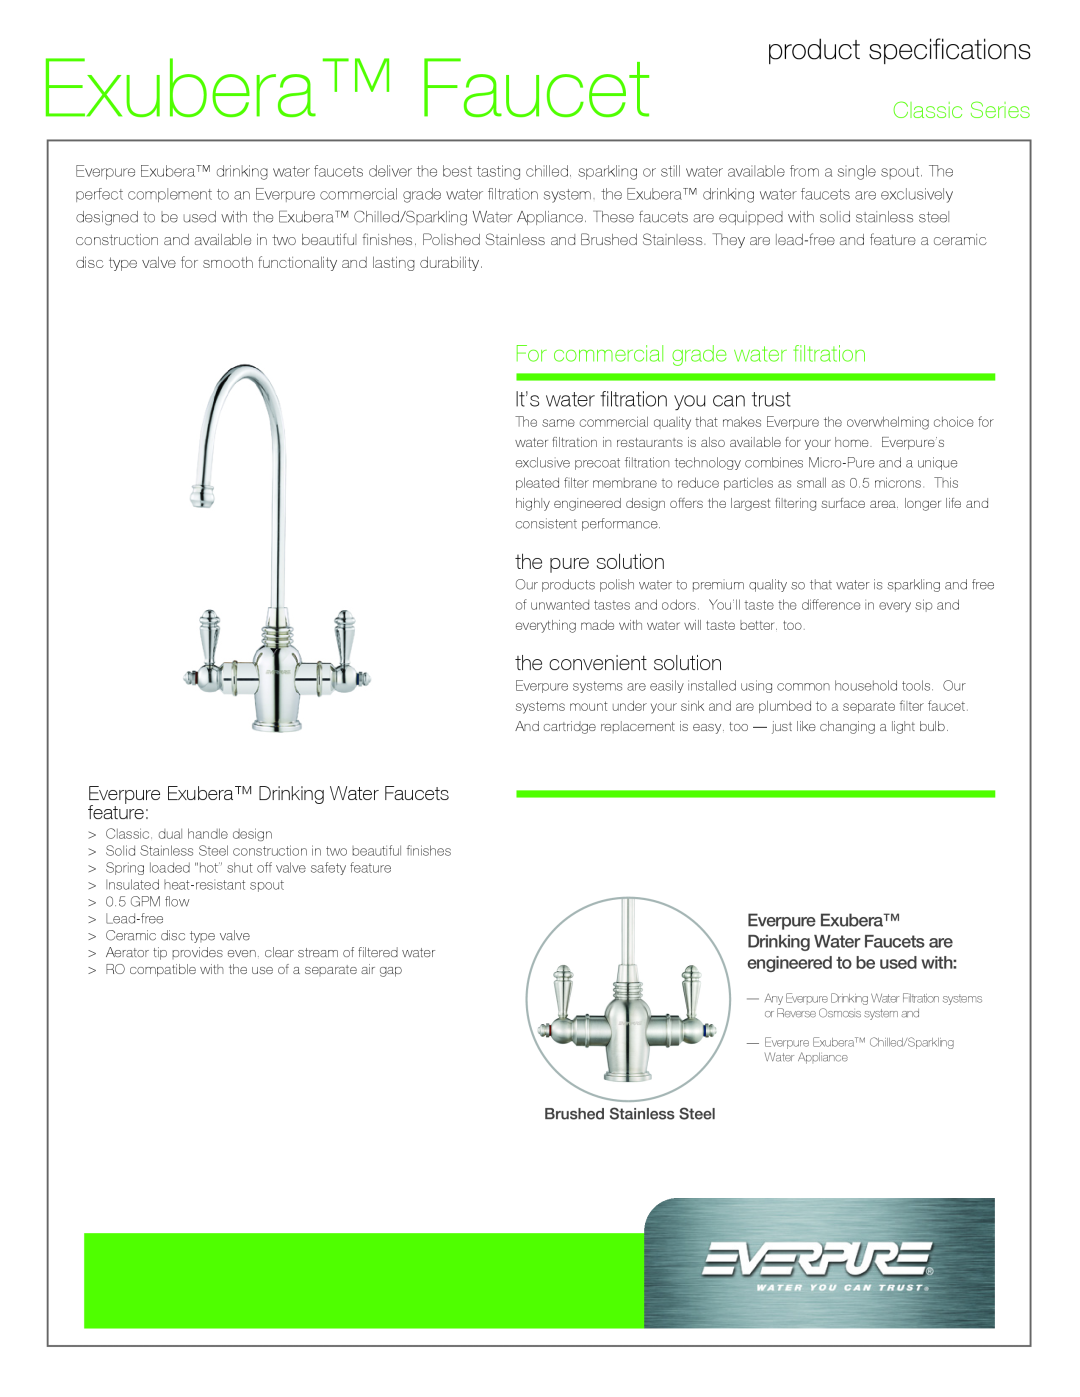 Everpure EV9007-31 manual Exubera Faucet, Classic Series, For commercial grade water filtration, the pure solution 